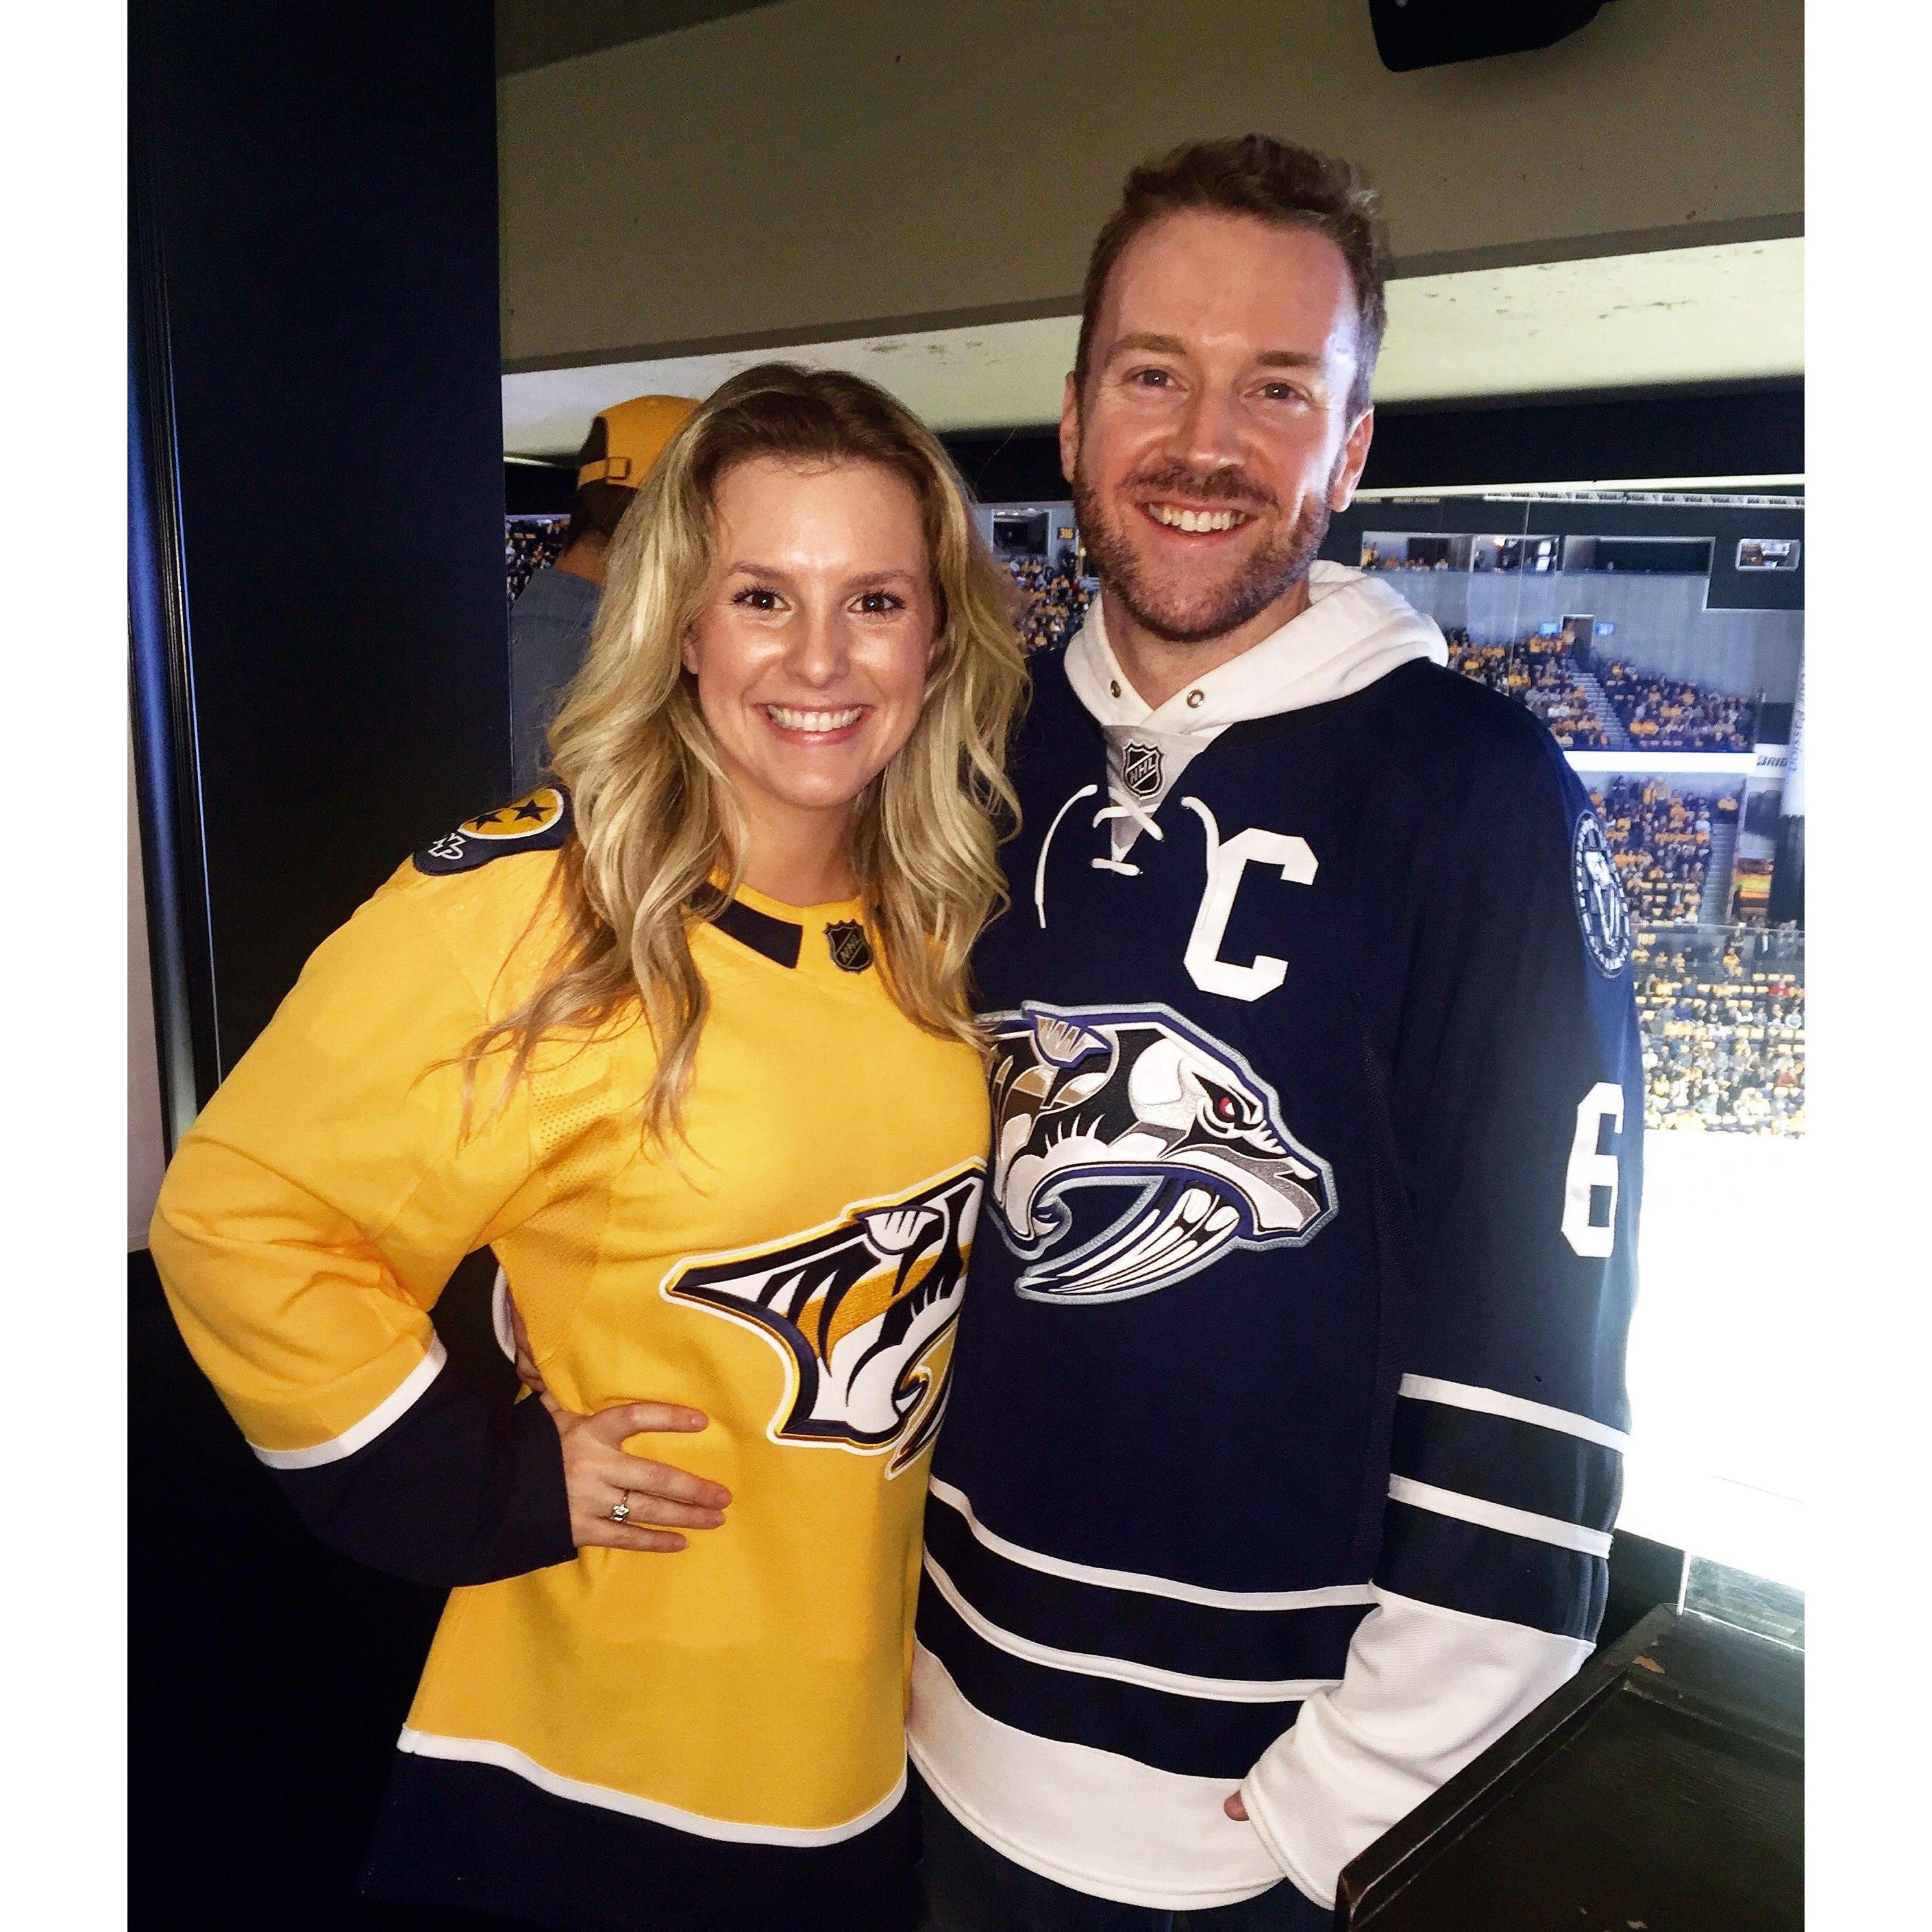 JW's and Brianna's first date was at a Nashville Predators Game! This was our 2nd game together!